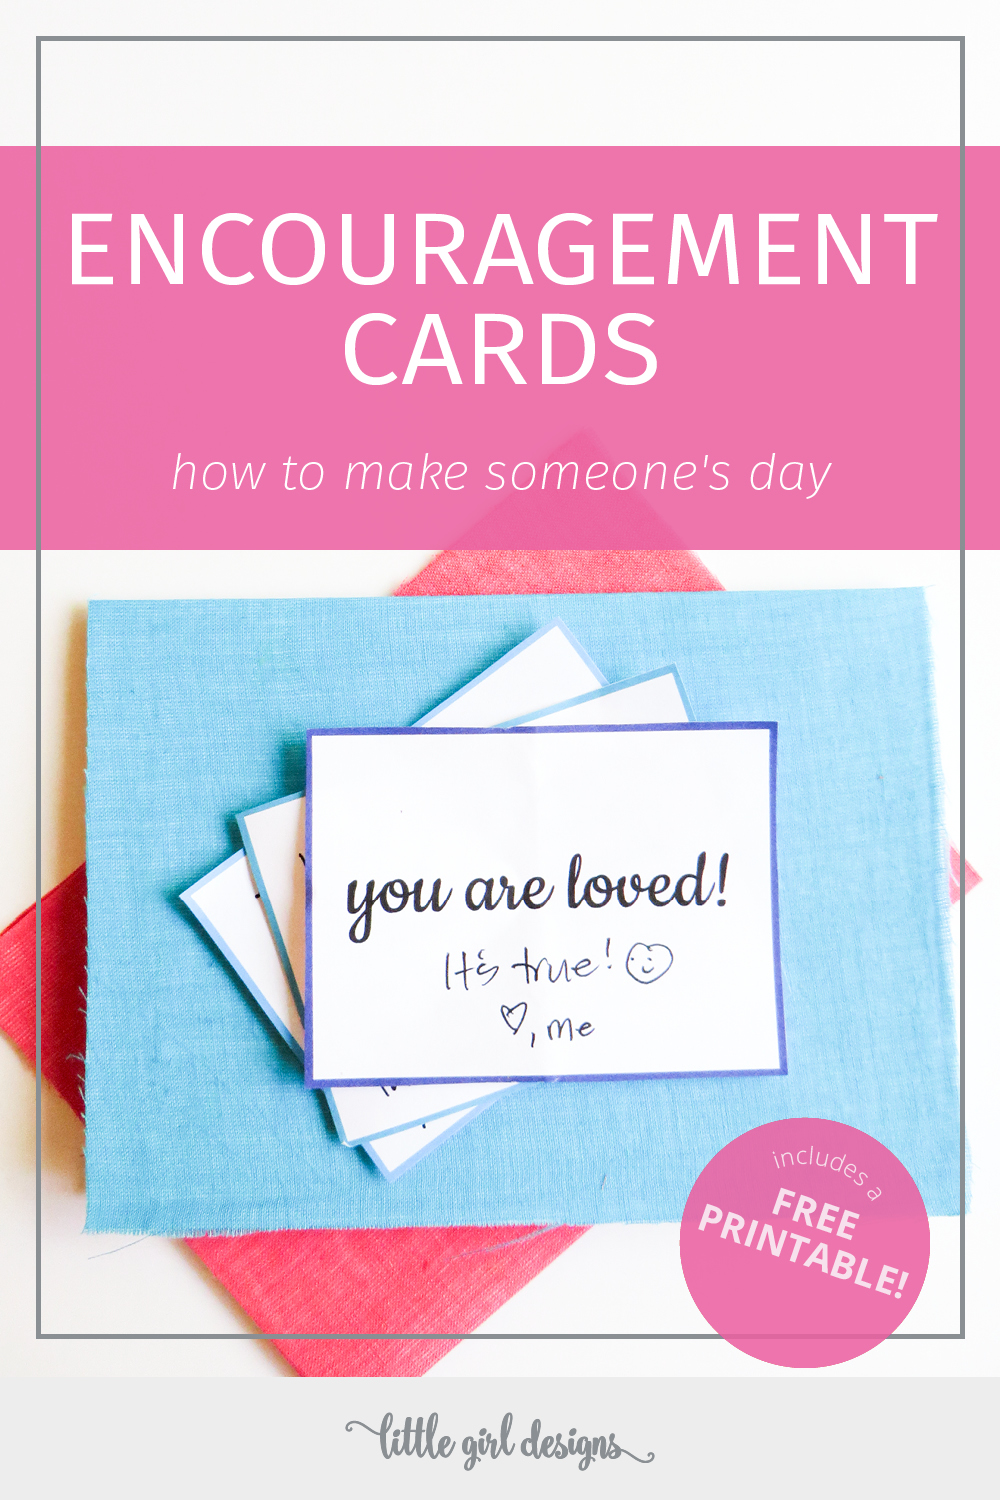 Encouragement Cards (Includes a Free Printable!) - a simple handmade gift for Valentine's or just because! I love tucking these into my husband's bag when he travels, and they also make great lunchbox notes.